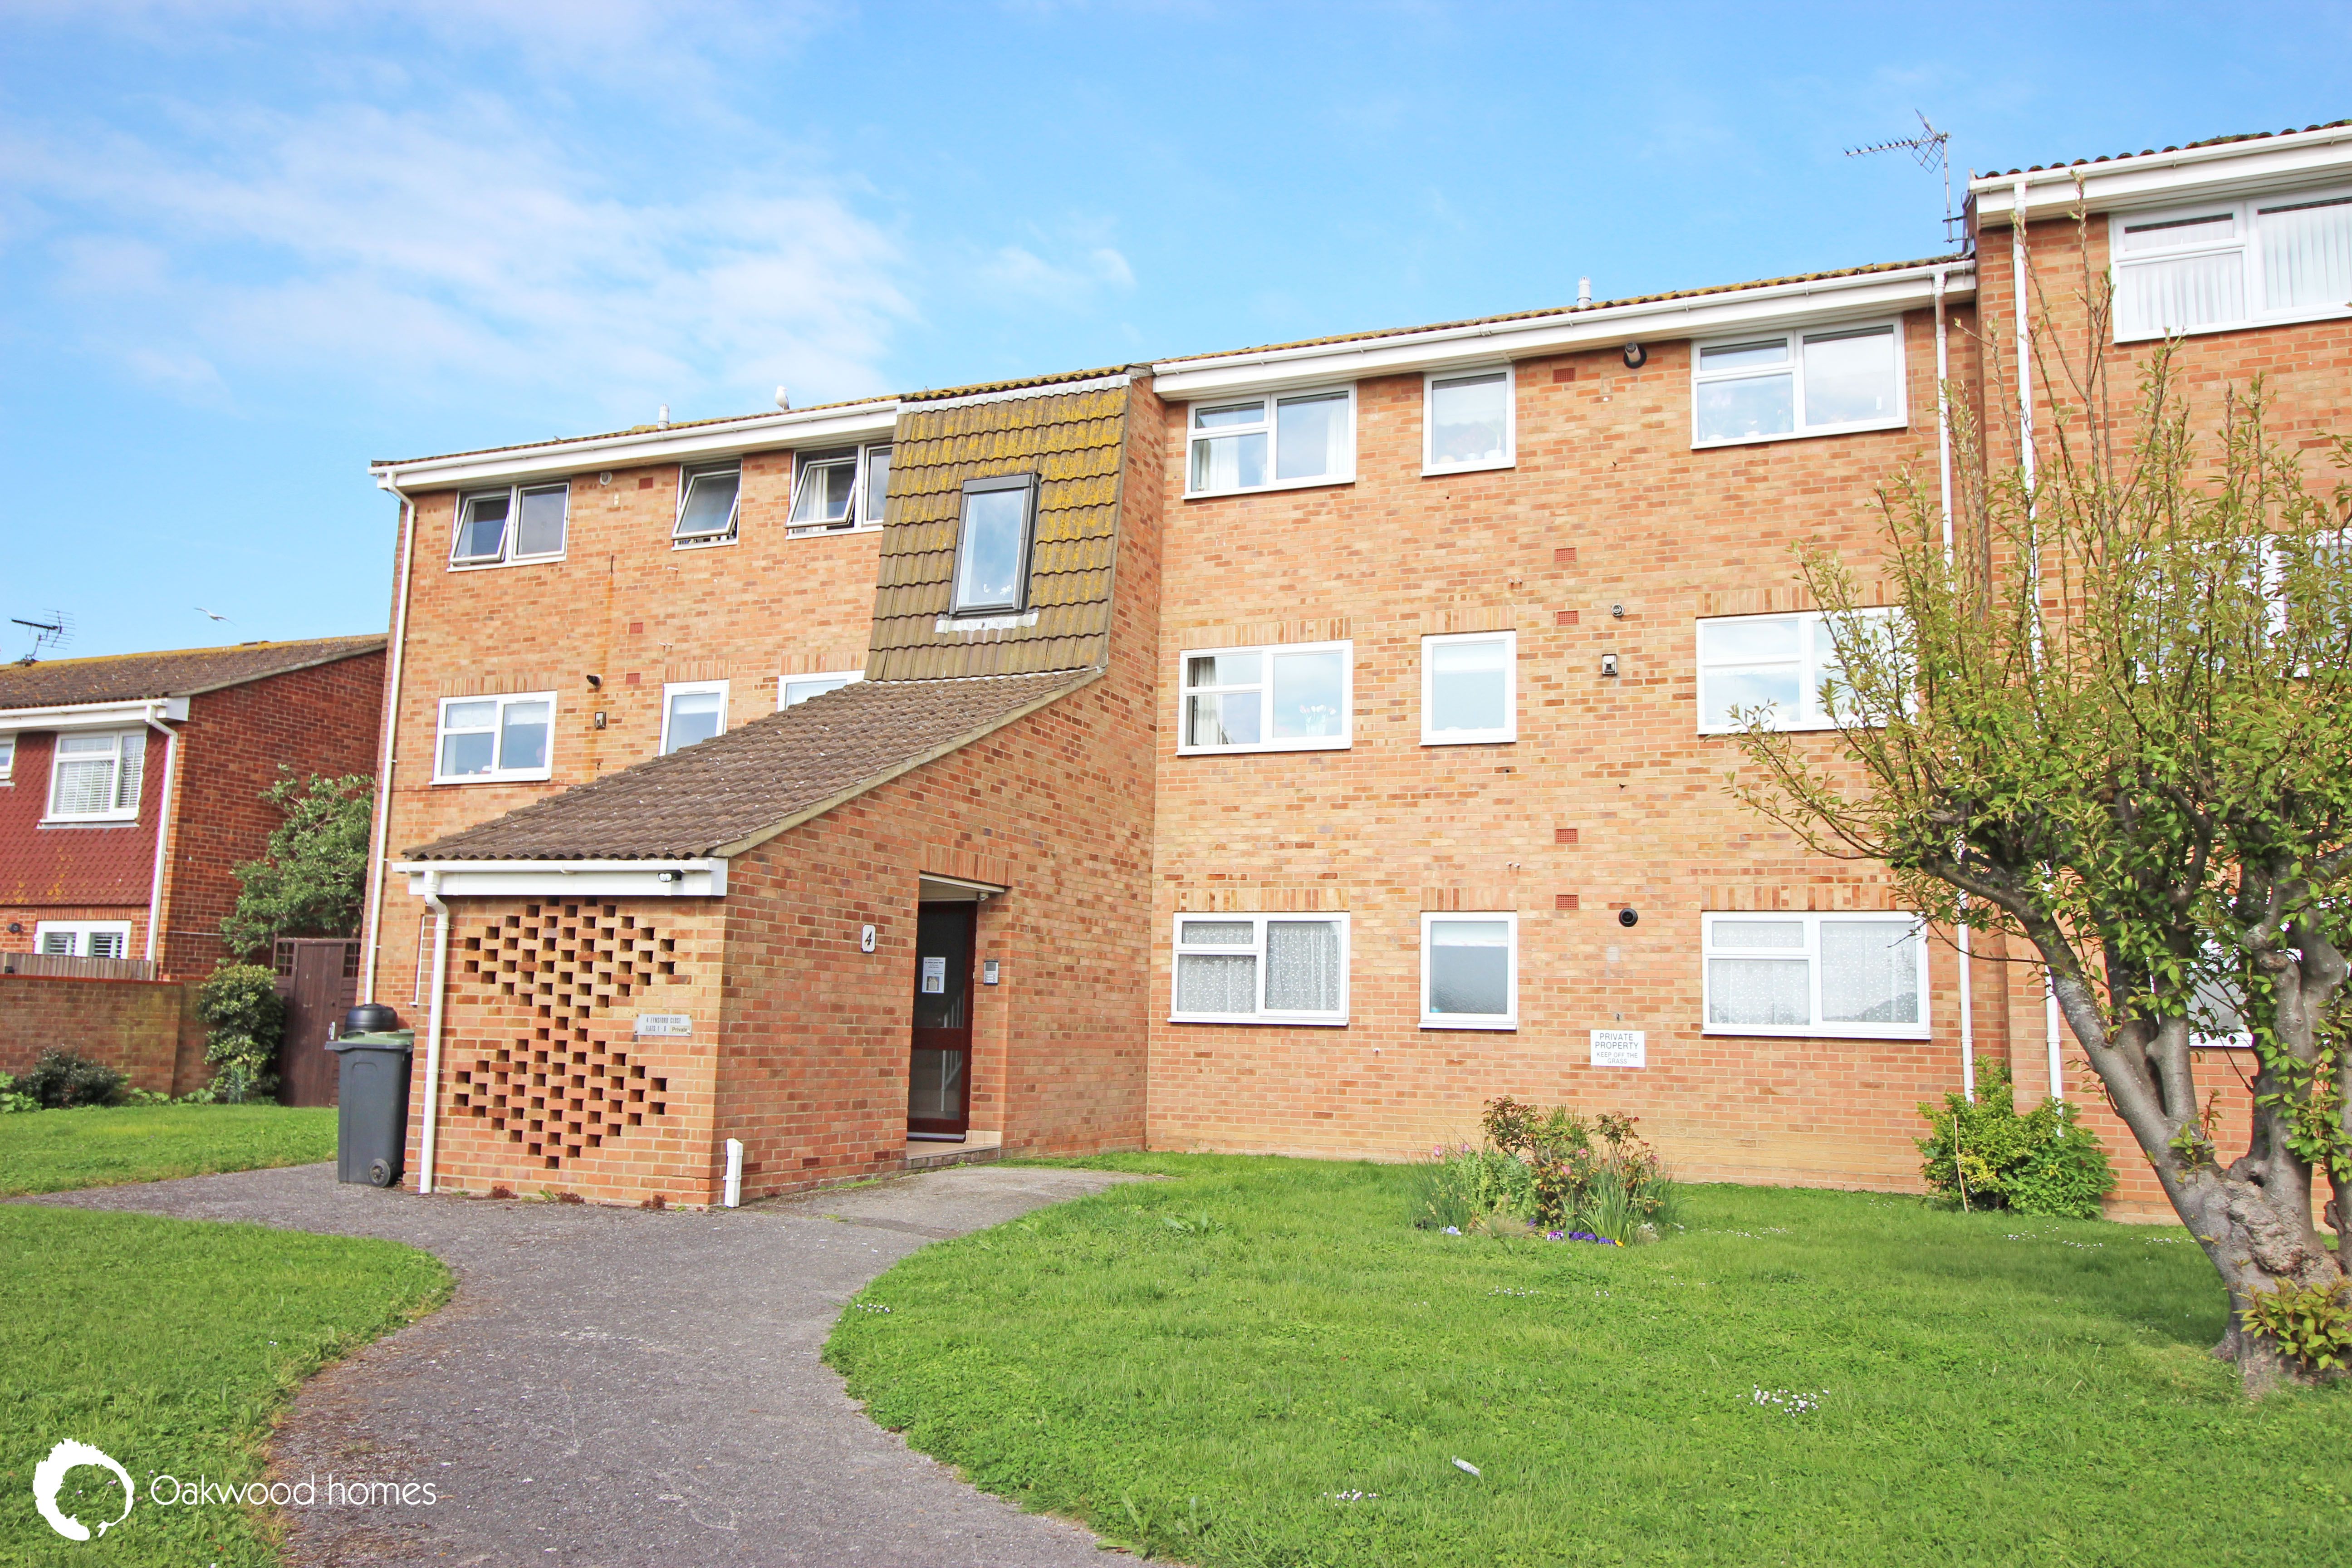 2 bed flat for sale in Eynsford Close, Palm Bay - Property Image 1